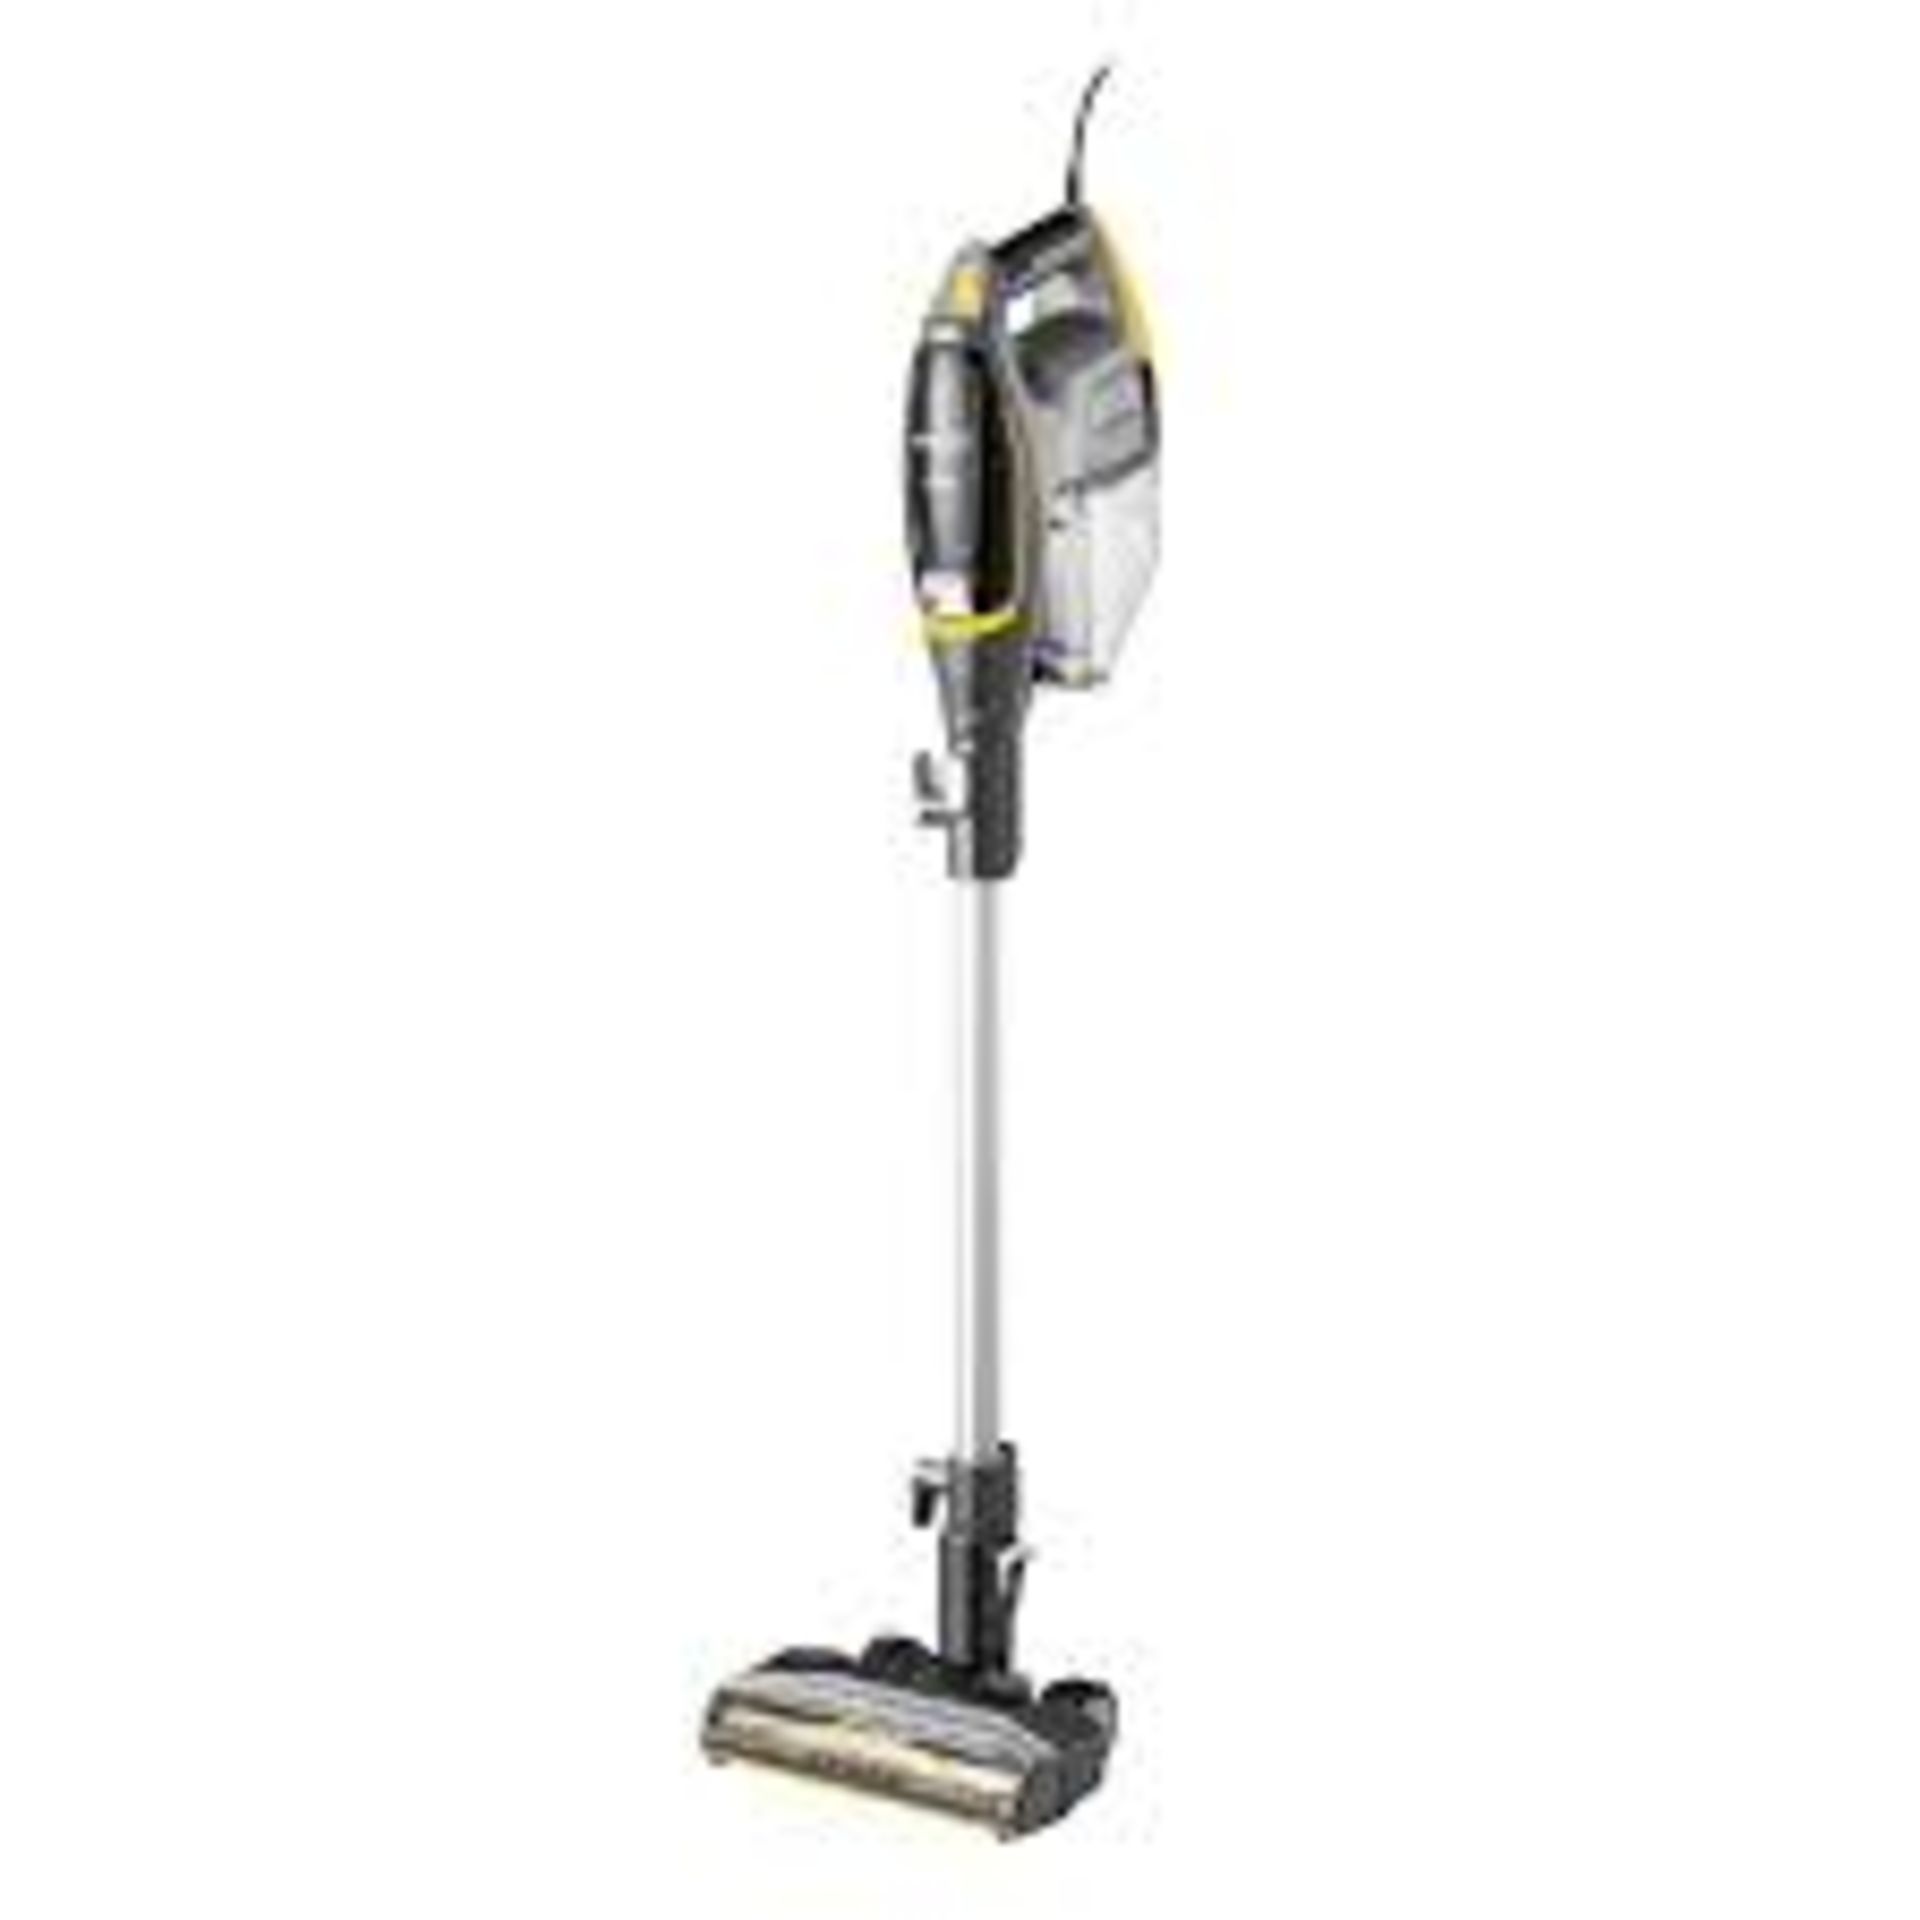 BRAND NEW Eureka NES510 2-in-1 Corded Stick & Handheld Vacuum Cleaner, 400W Motor for Whole House, - Image 2 of 3